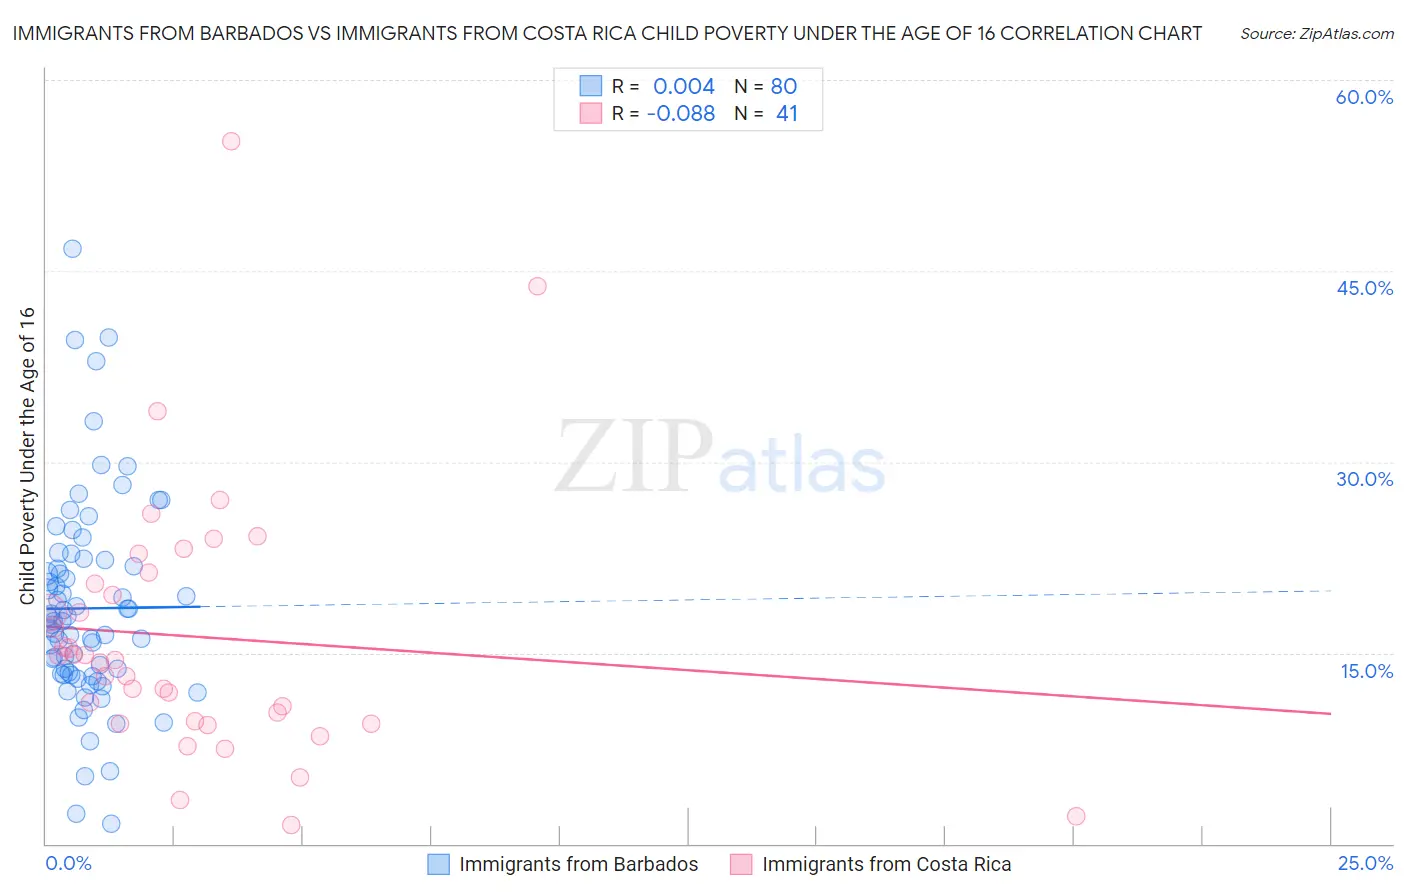 Immigrants from Barbados vs Immigrants from Costa Rica Child Poverty Under the Age of 16